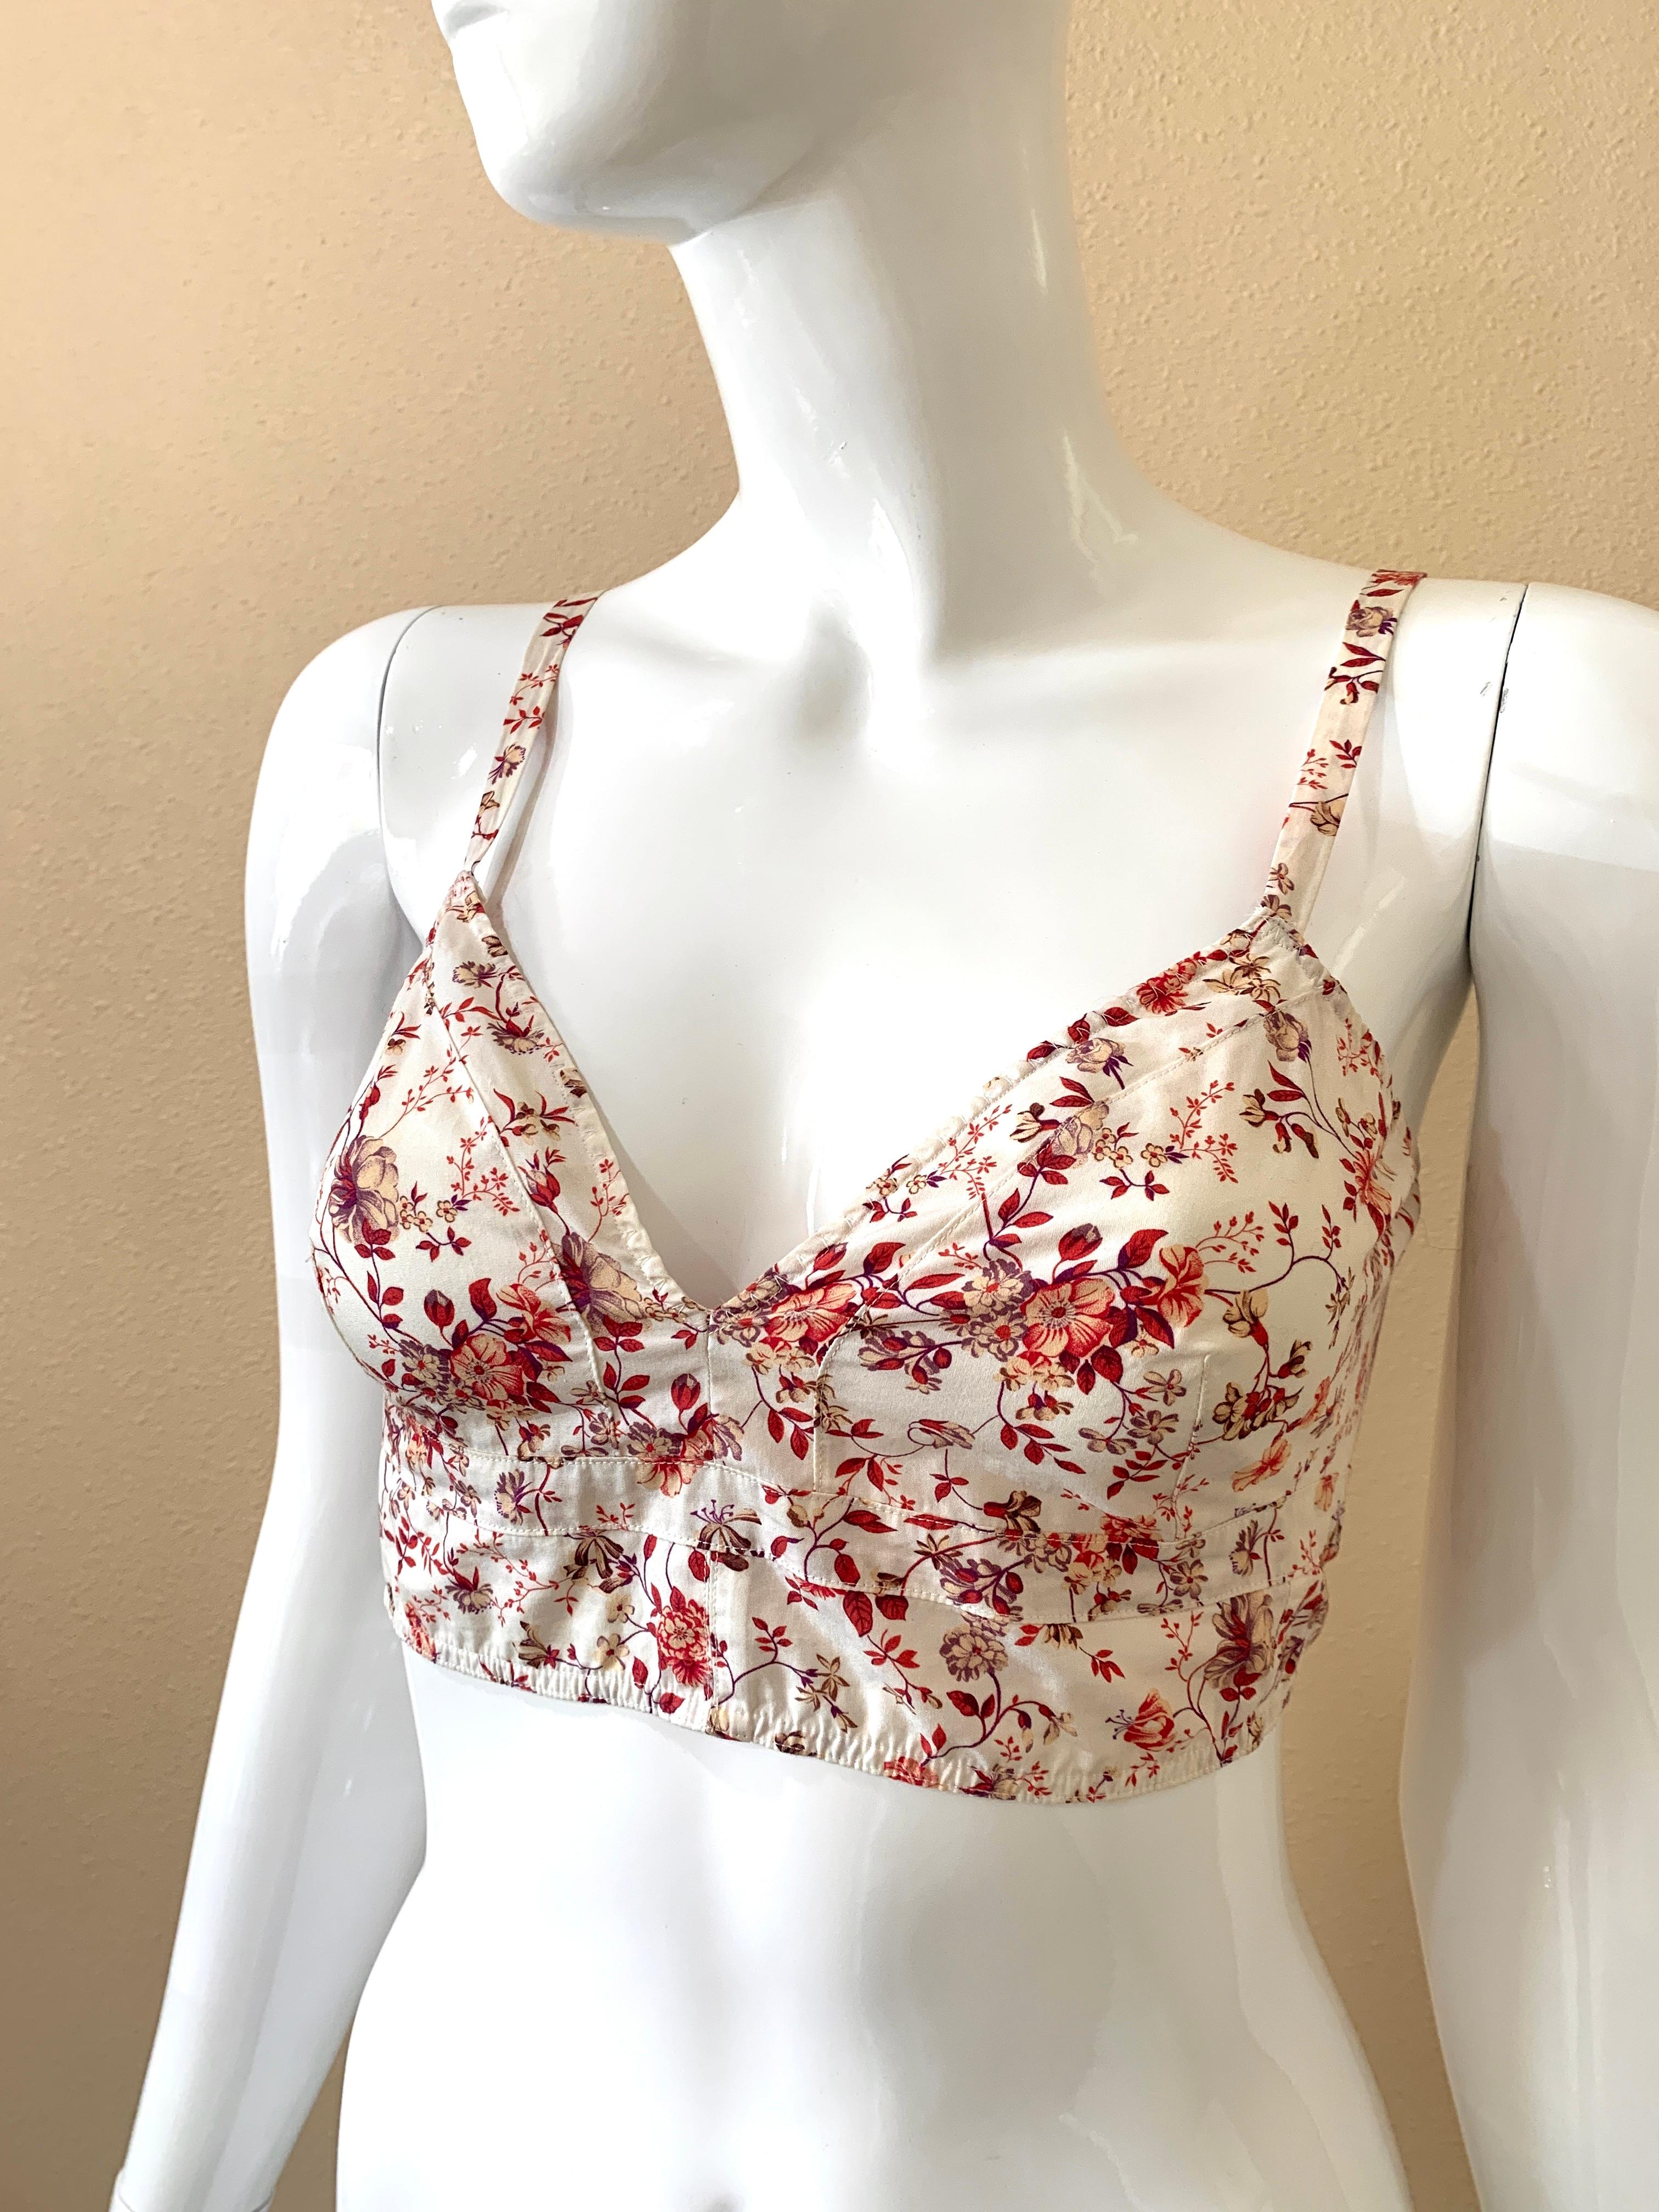 Etro Floral Paisley Crop Top Size 38 In Good Condition For Sale In Thousand Oaks, CA